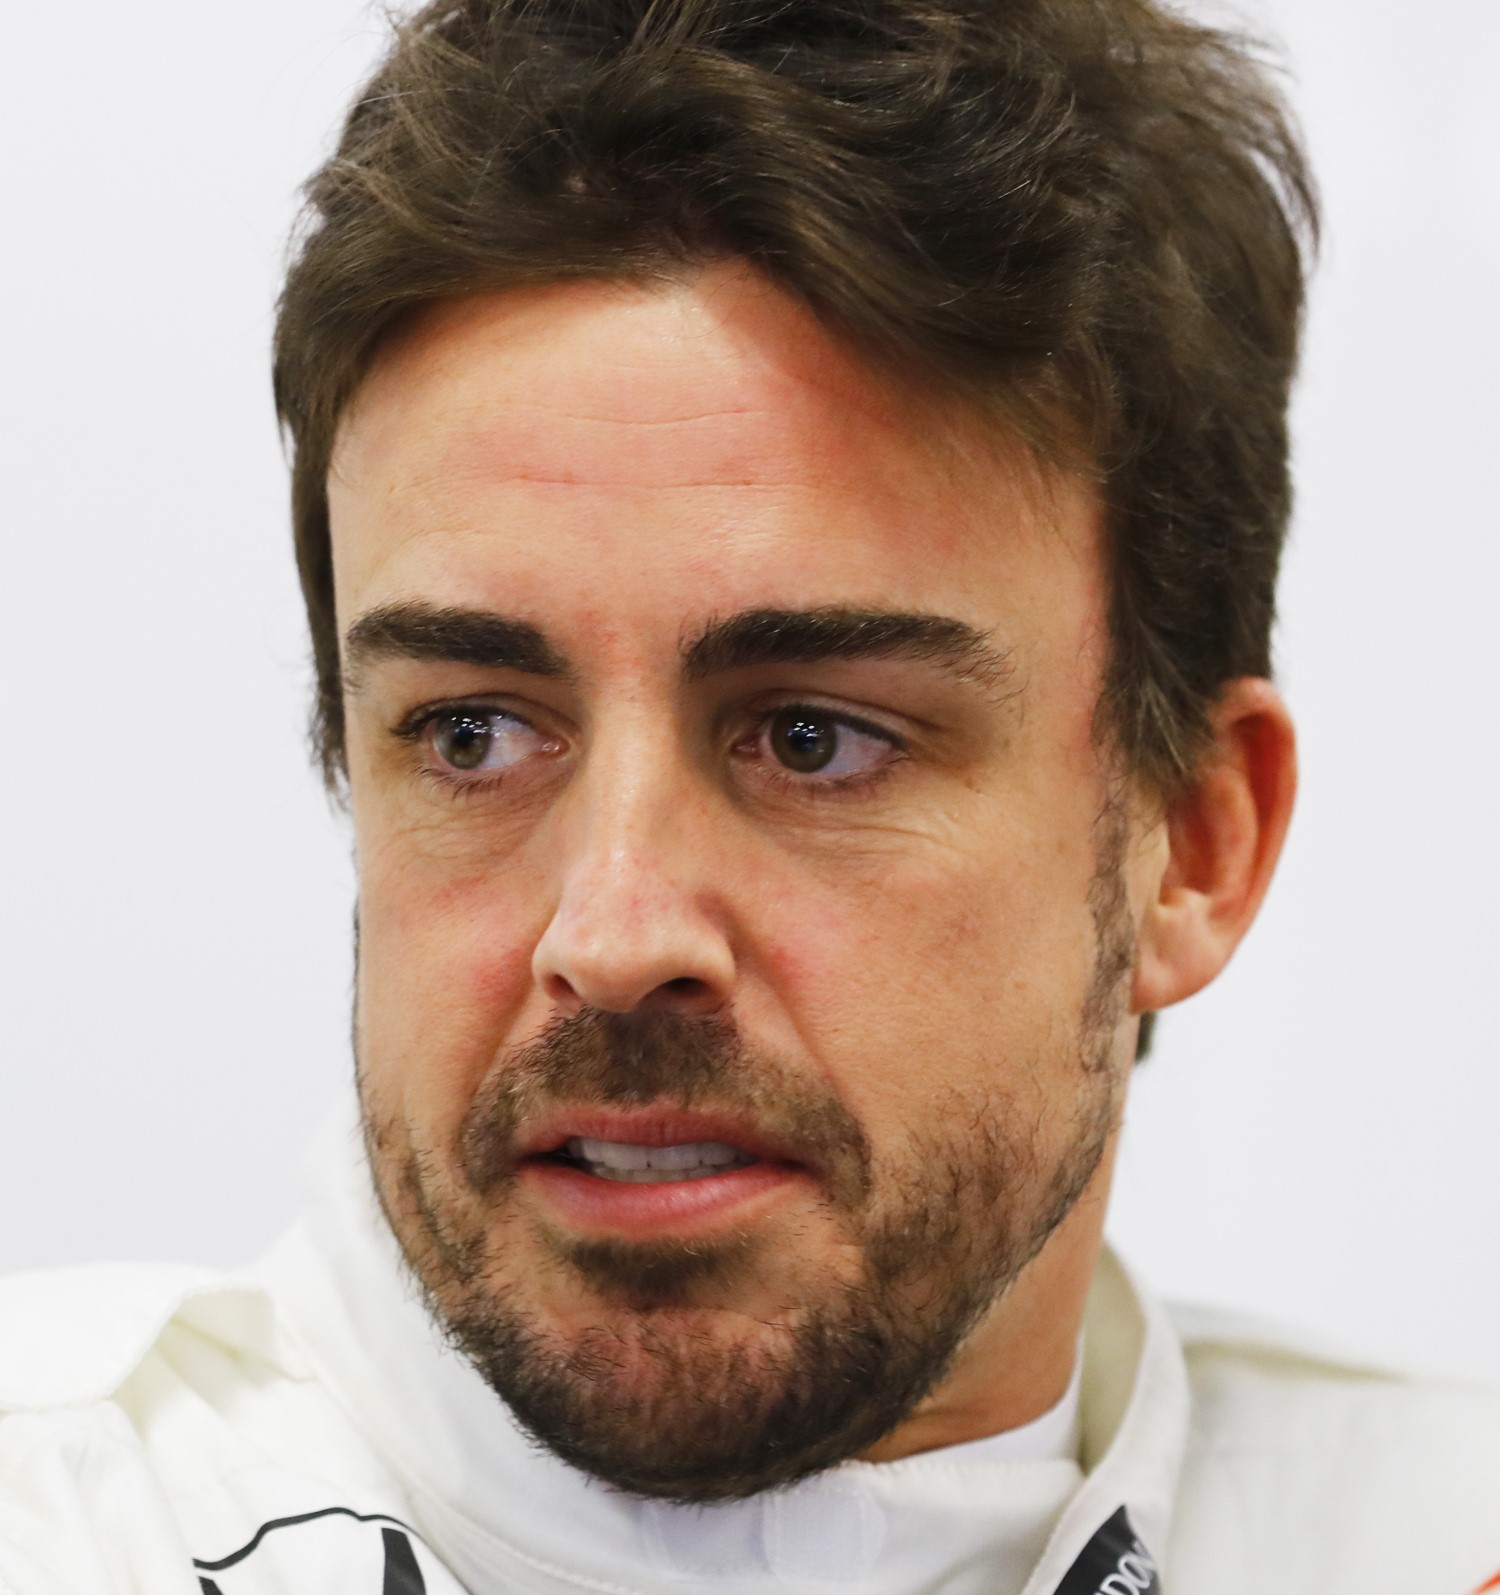 At McLaren Honda Alonso has learned that F1 is 99% car and 1% driver. Without a good car he could do nothing to make it fast